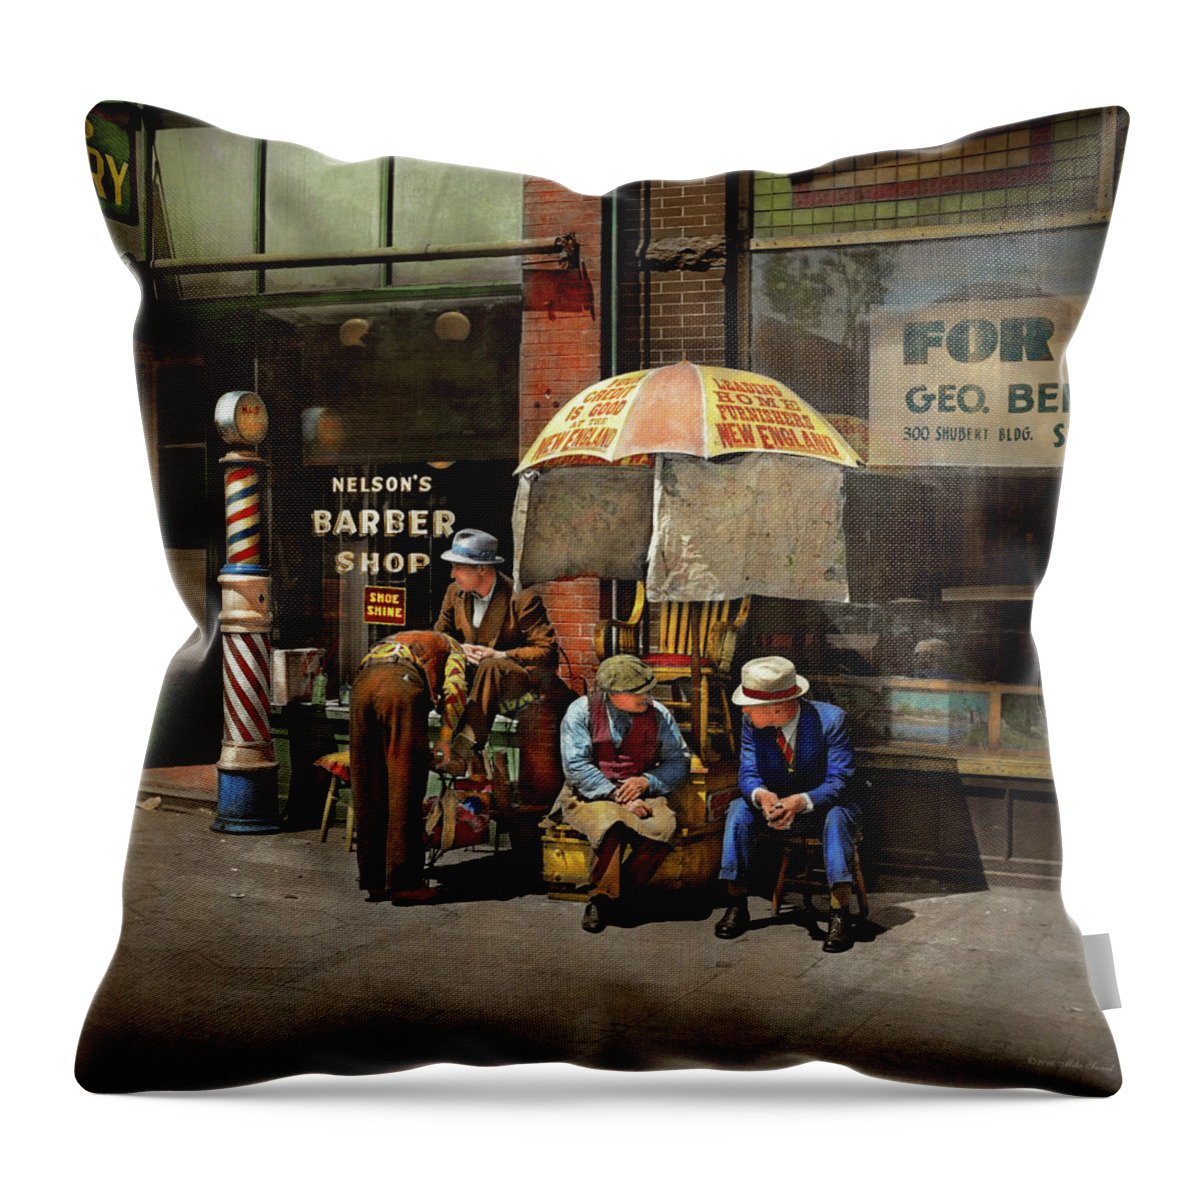 Barber Throw Pillow featuring the photograph Barber - At Nelson's Barber Shop 1937 by Mike Savad